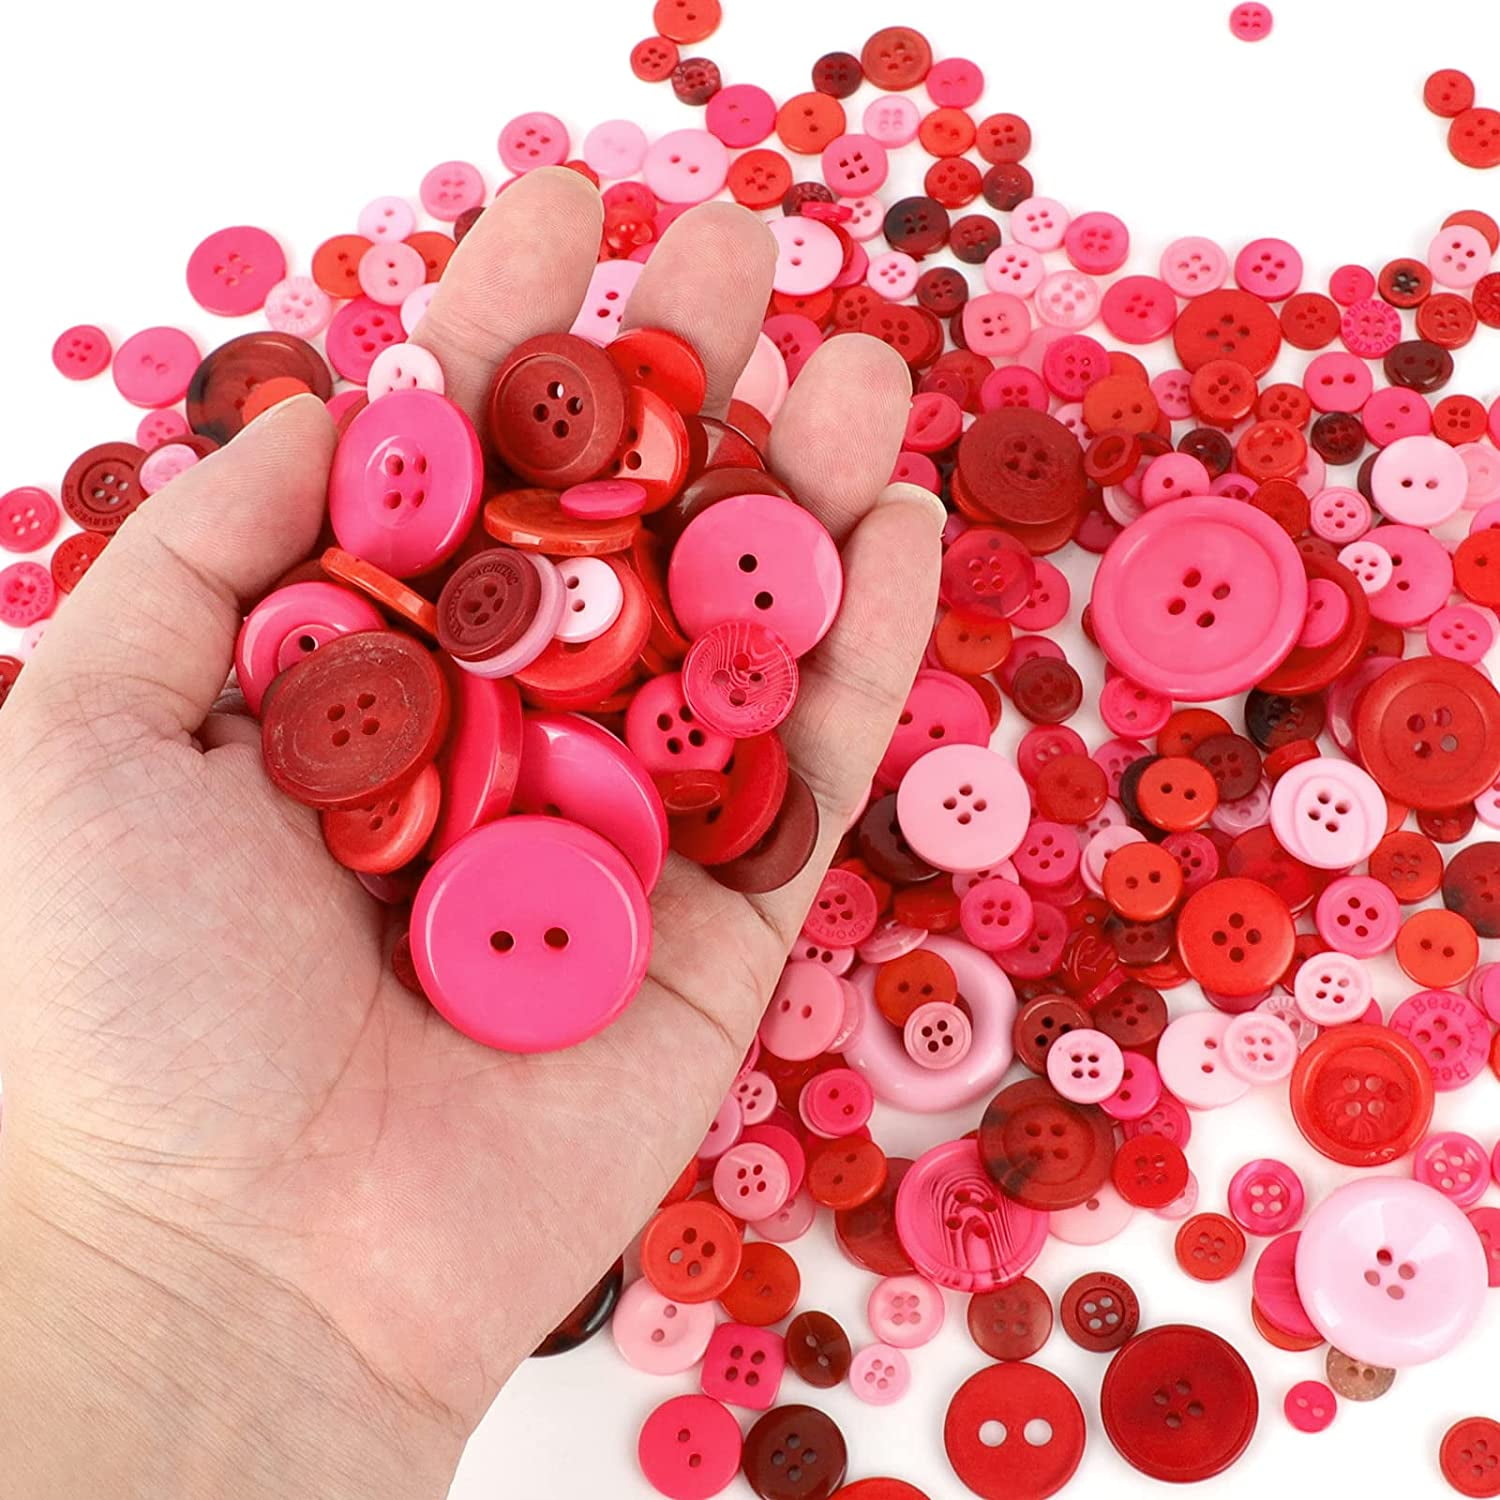  Esoca 650Pcs Red Craft Buttons Pink Red Buttons For Crafts  Assorted Resin Buttons Lot Of Red Buttons For Crafting